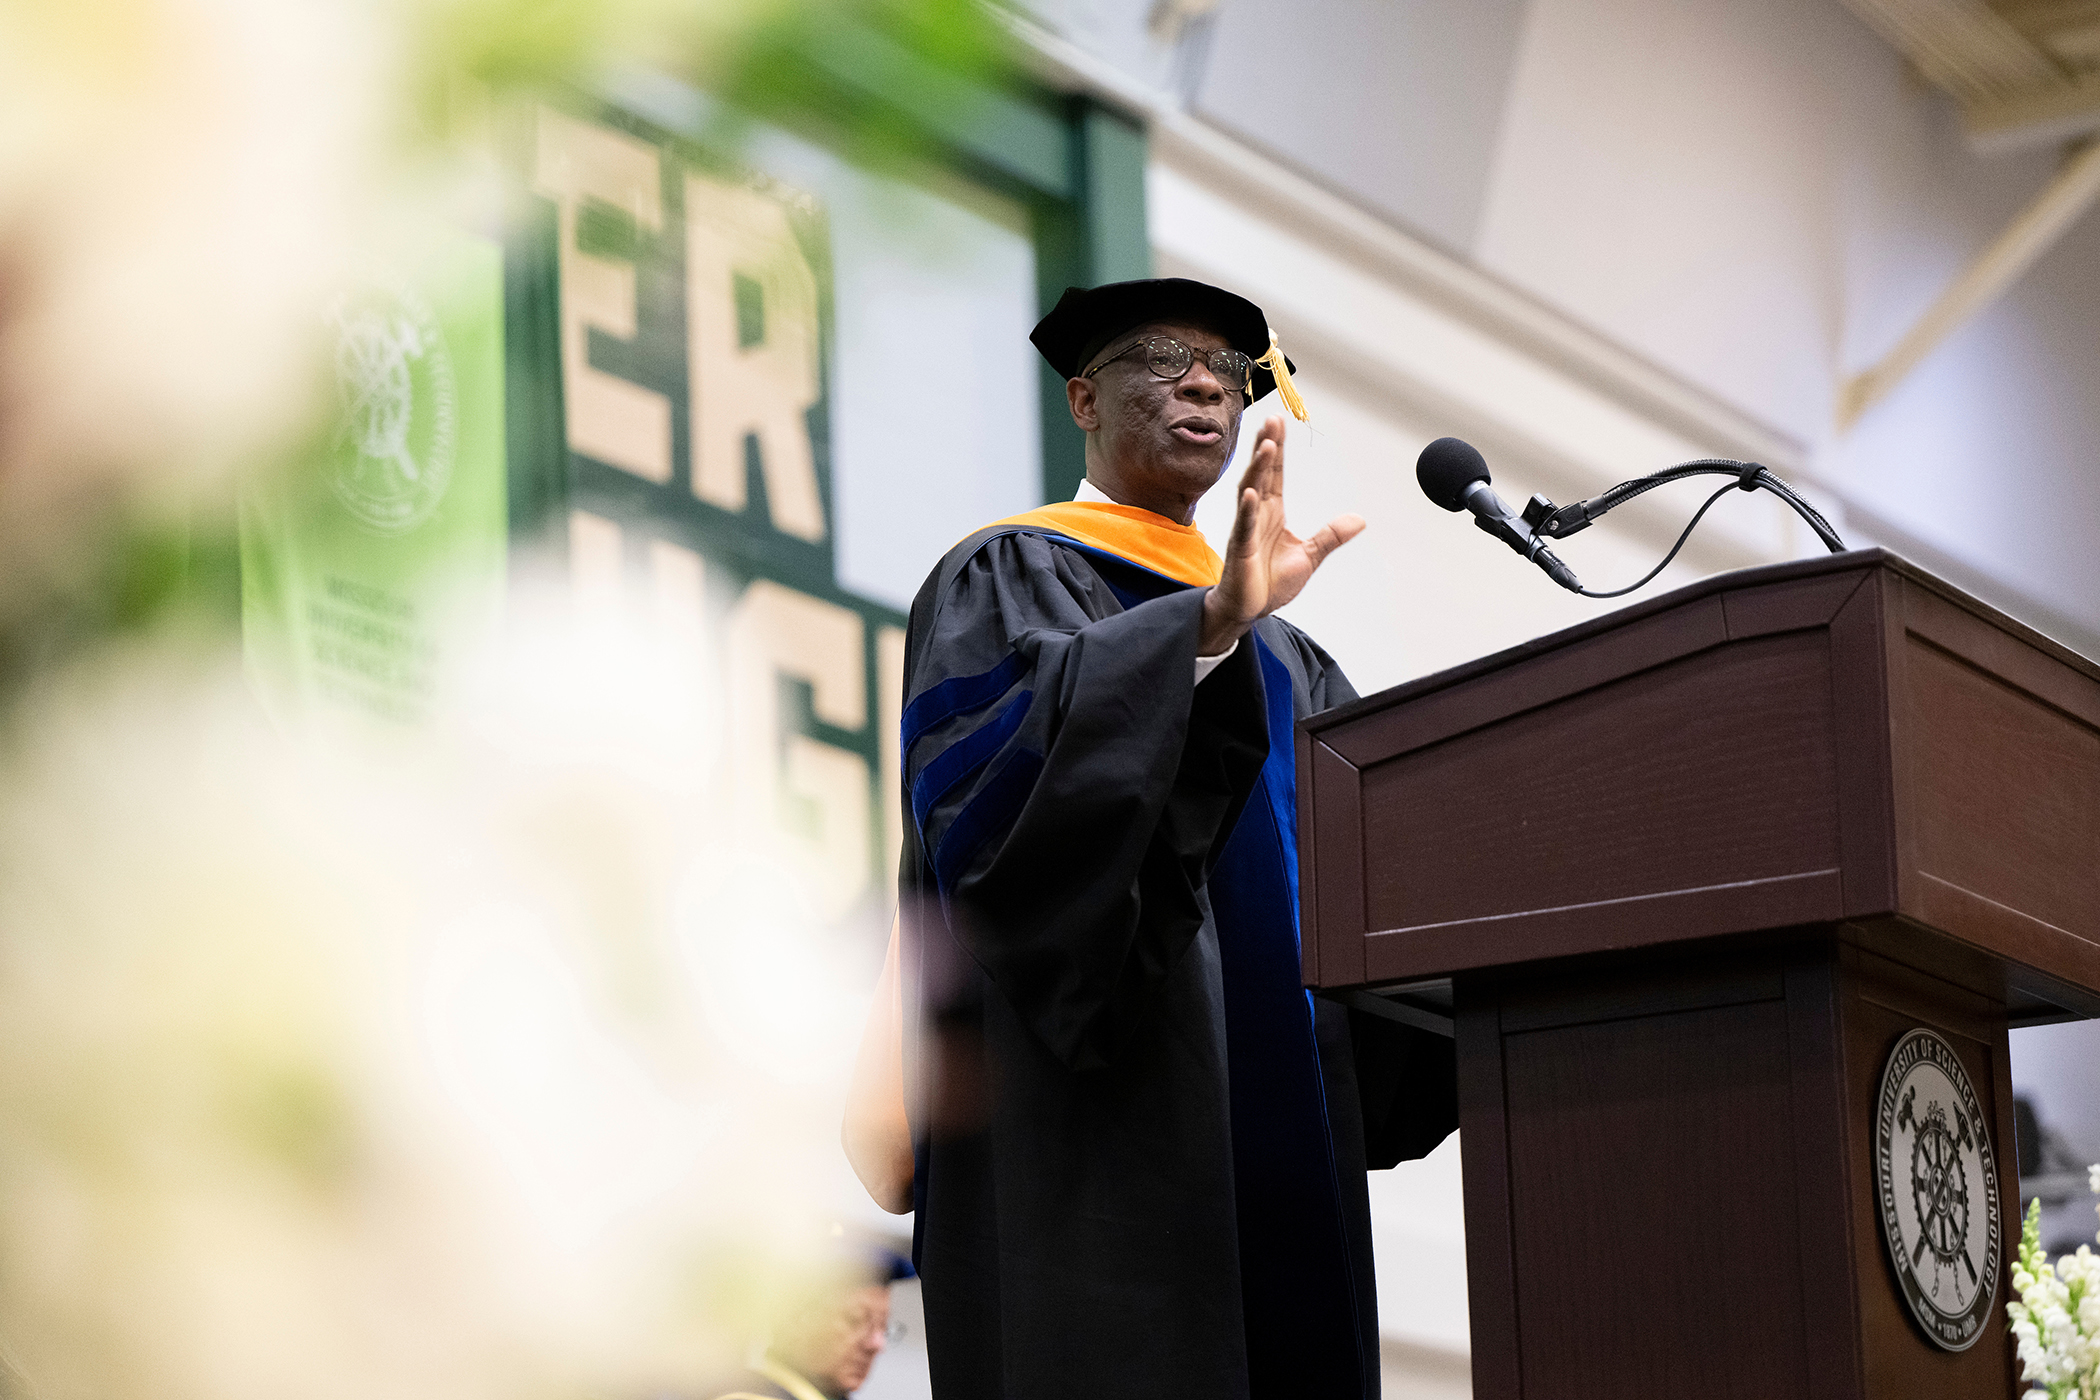 School of Engineering Dean Delivers Commencement Address to Missouri S&T Ph.D. Graduates